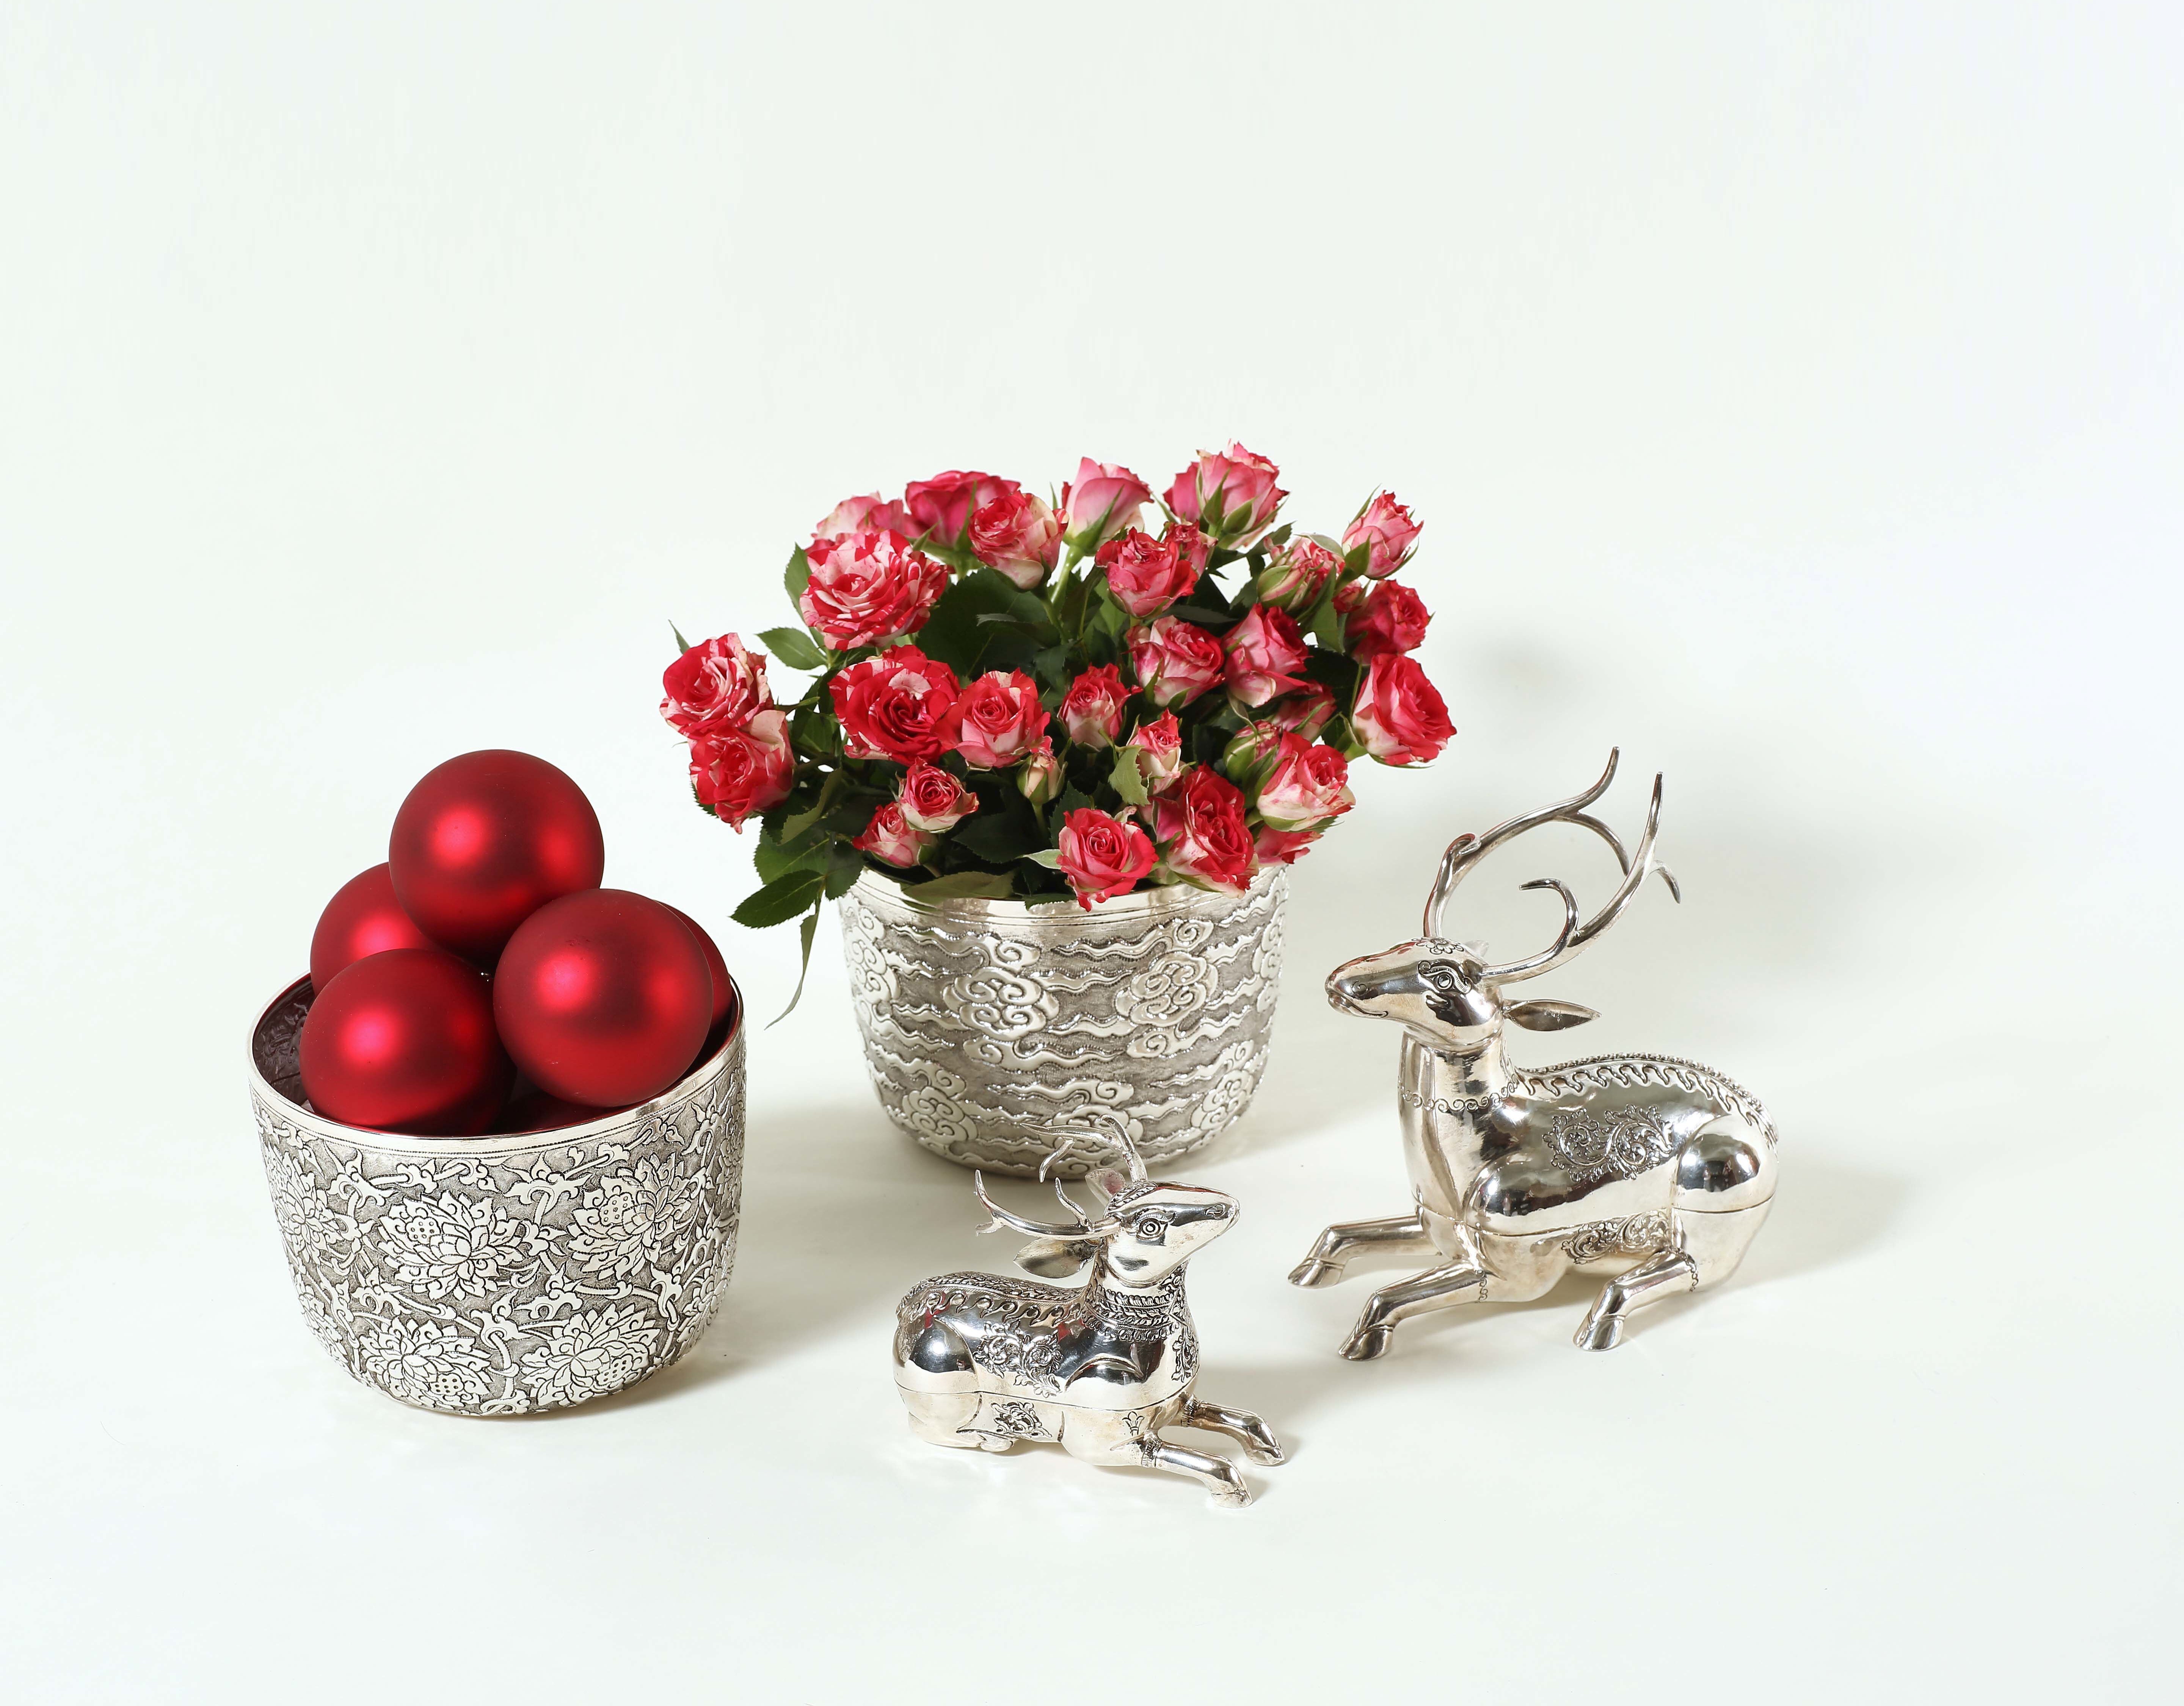 Investing in gorgeous silverware and sustainable, organic decorations will make Christmas 2020 even more meaningful. Photo: handout